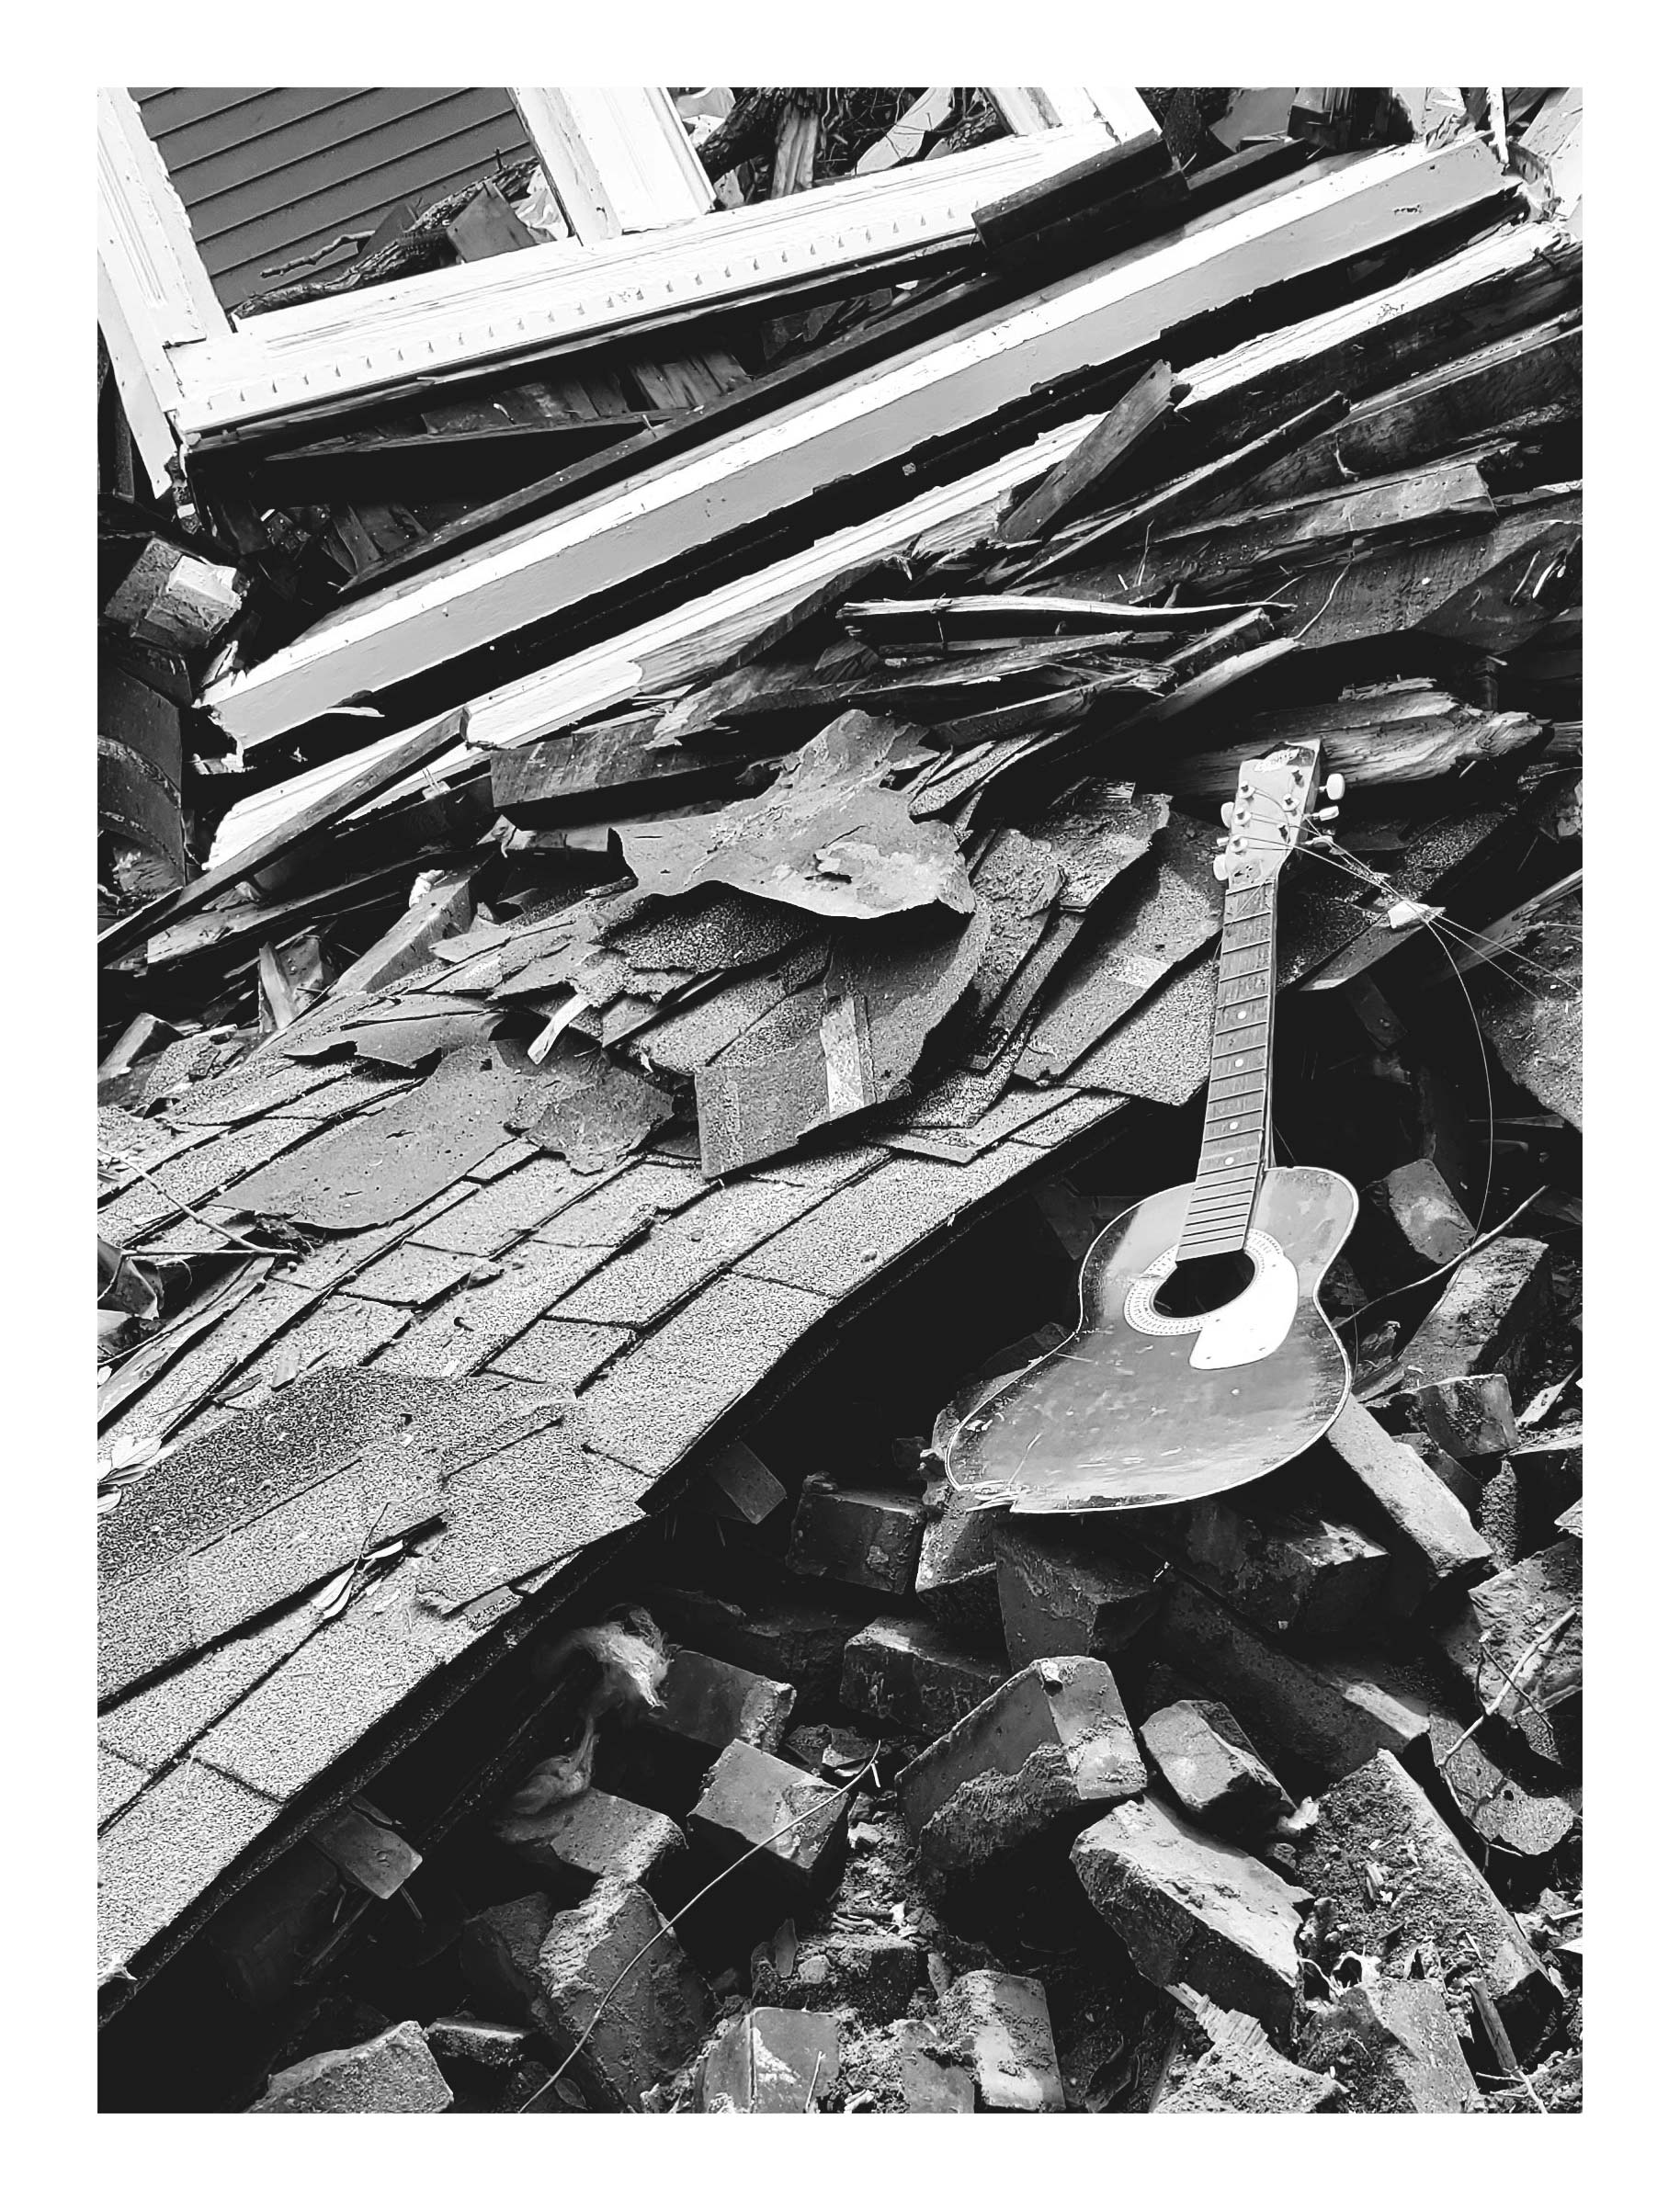 Wood, Black-and-white, Line, Parallel, Monochrome photography, Monochrome, Pattern, Metal, Font, Still life photography